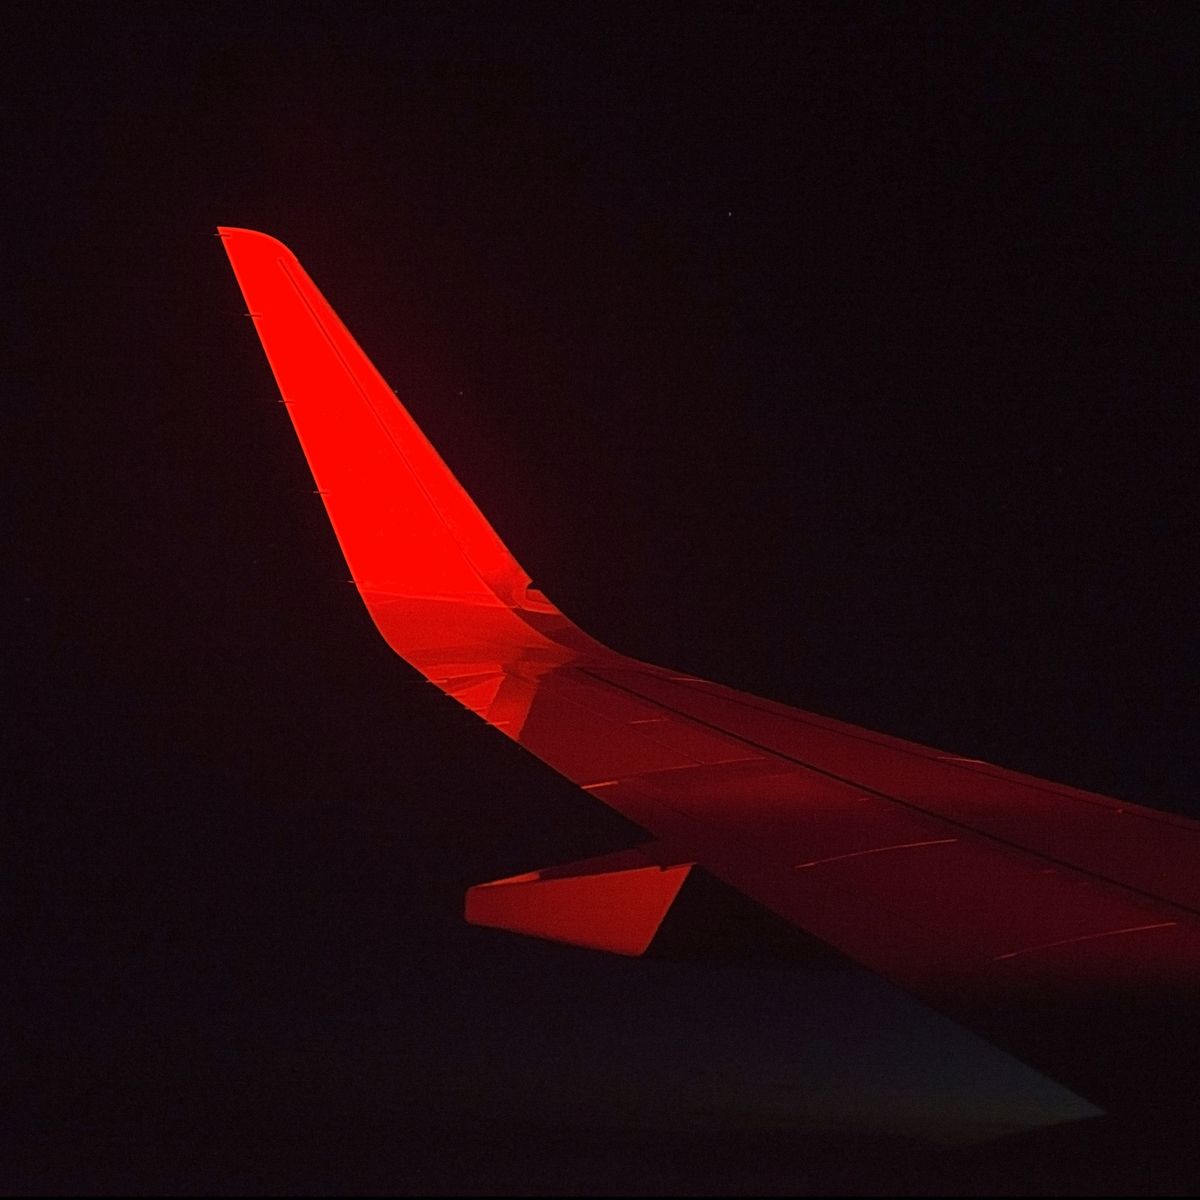 View of a airplane wing at night during a red eye flight